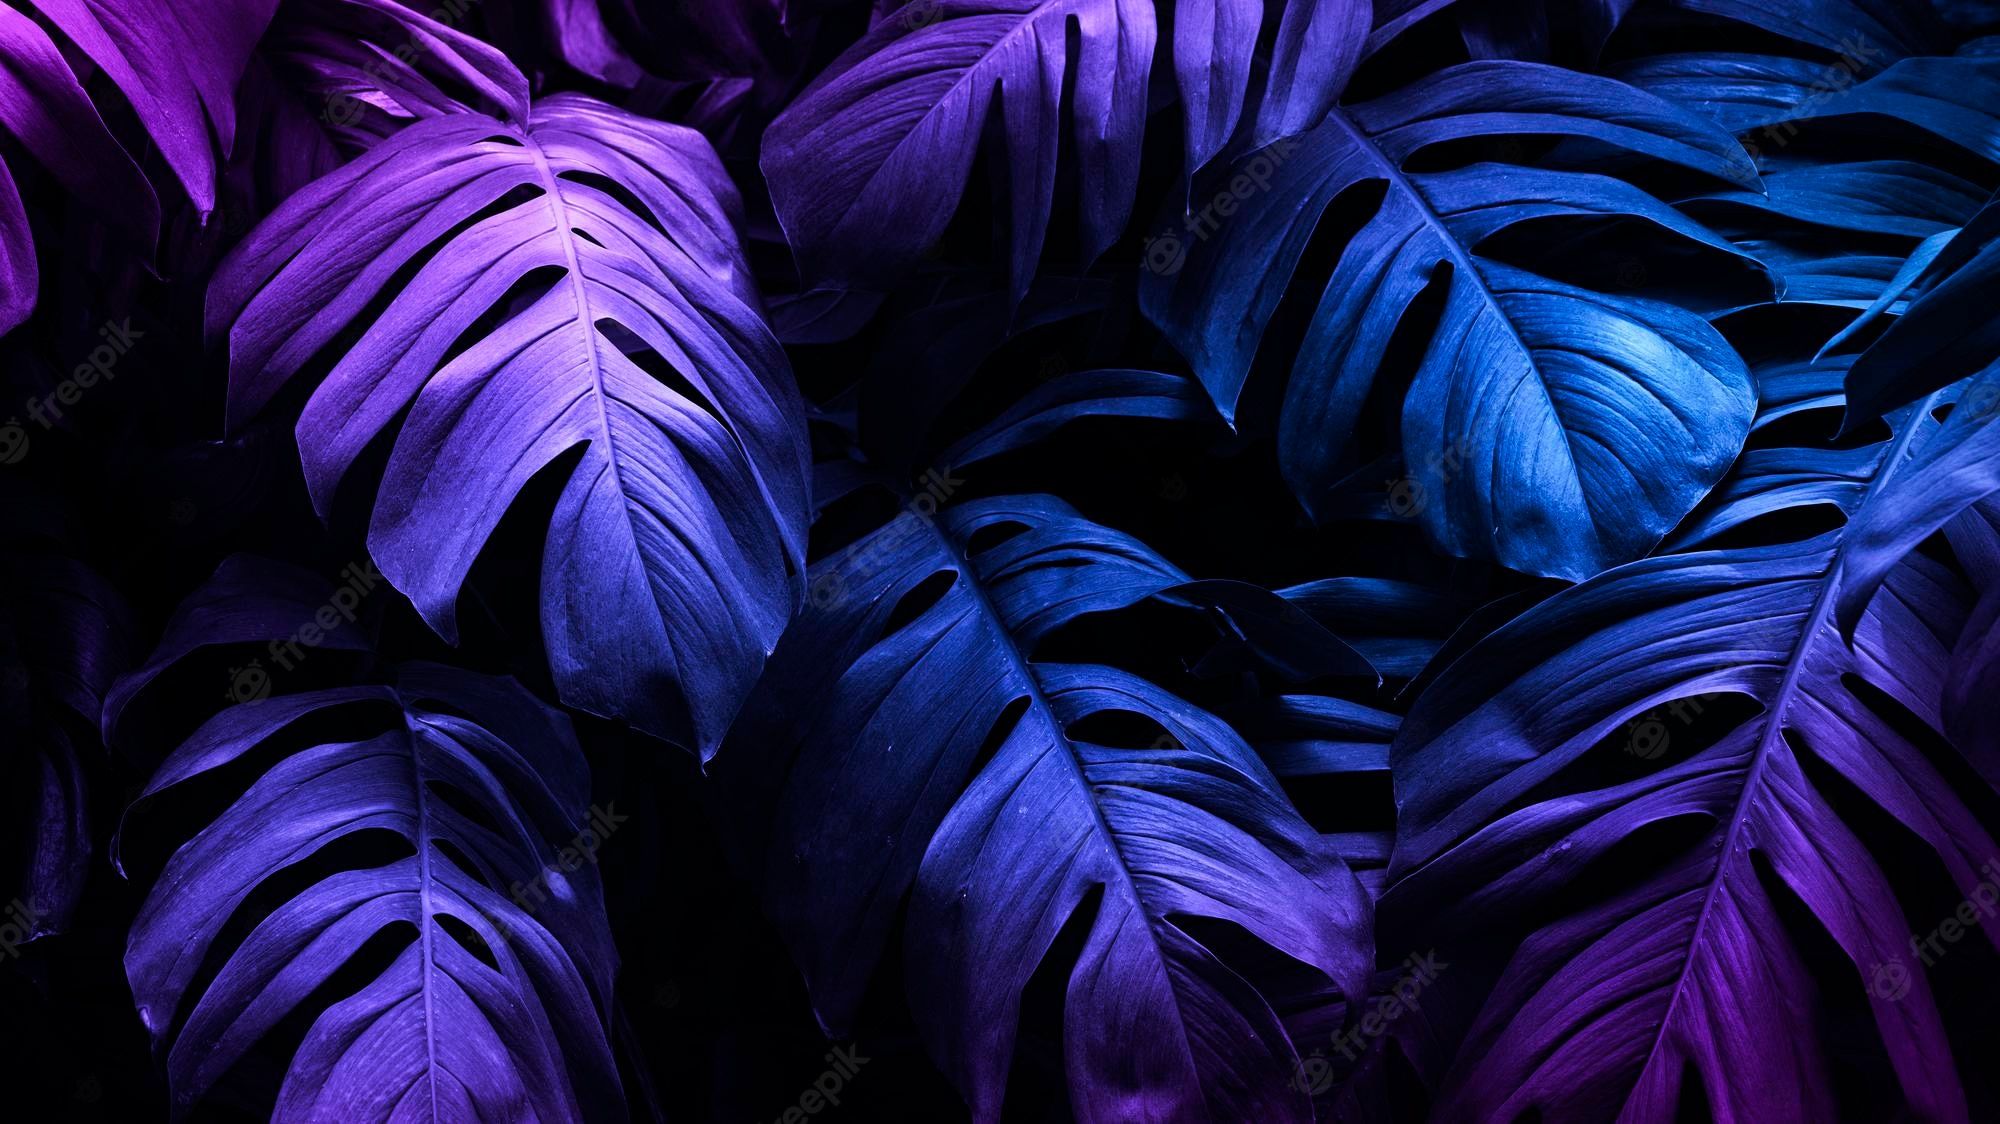 Tropical leaves with a purple and blue gradient - Neon blue